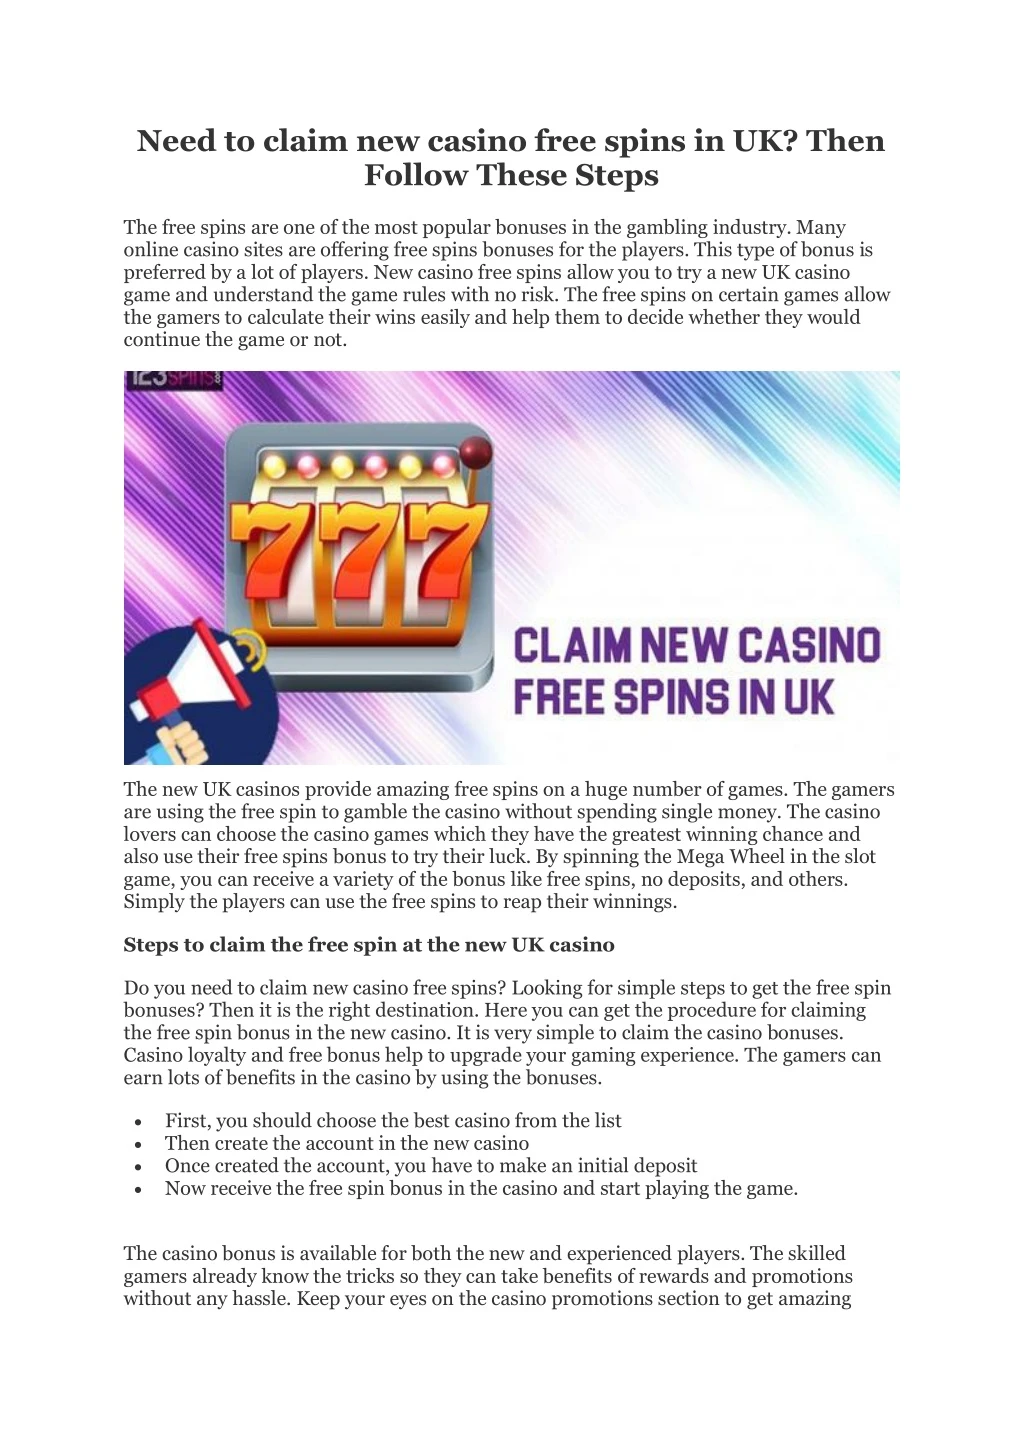 need to claim new casino free spins in uk then n.